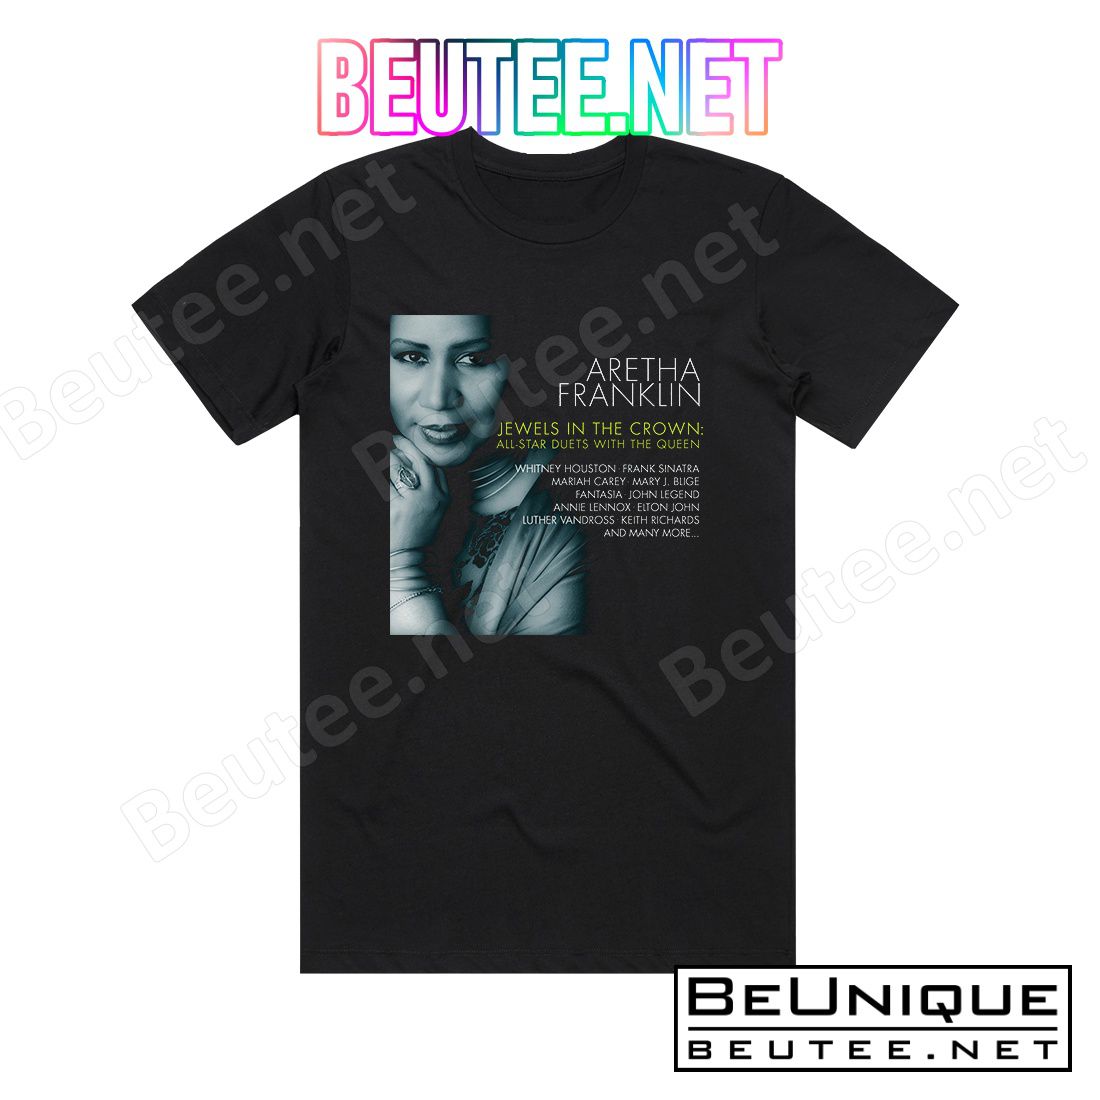 Aretha Franklin Jewels In The Crown All Star Duets With The Queen Album Cover T-Shirt